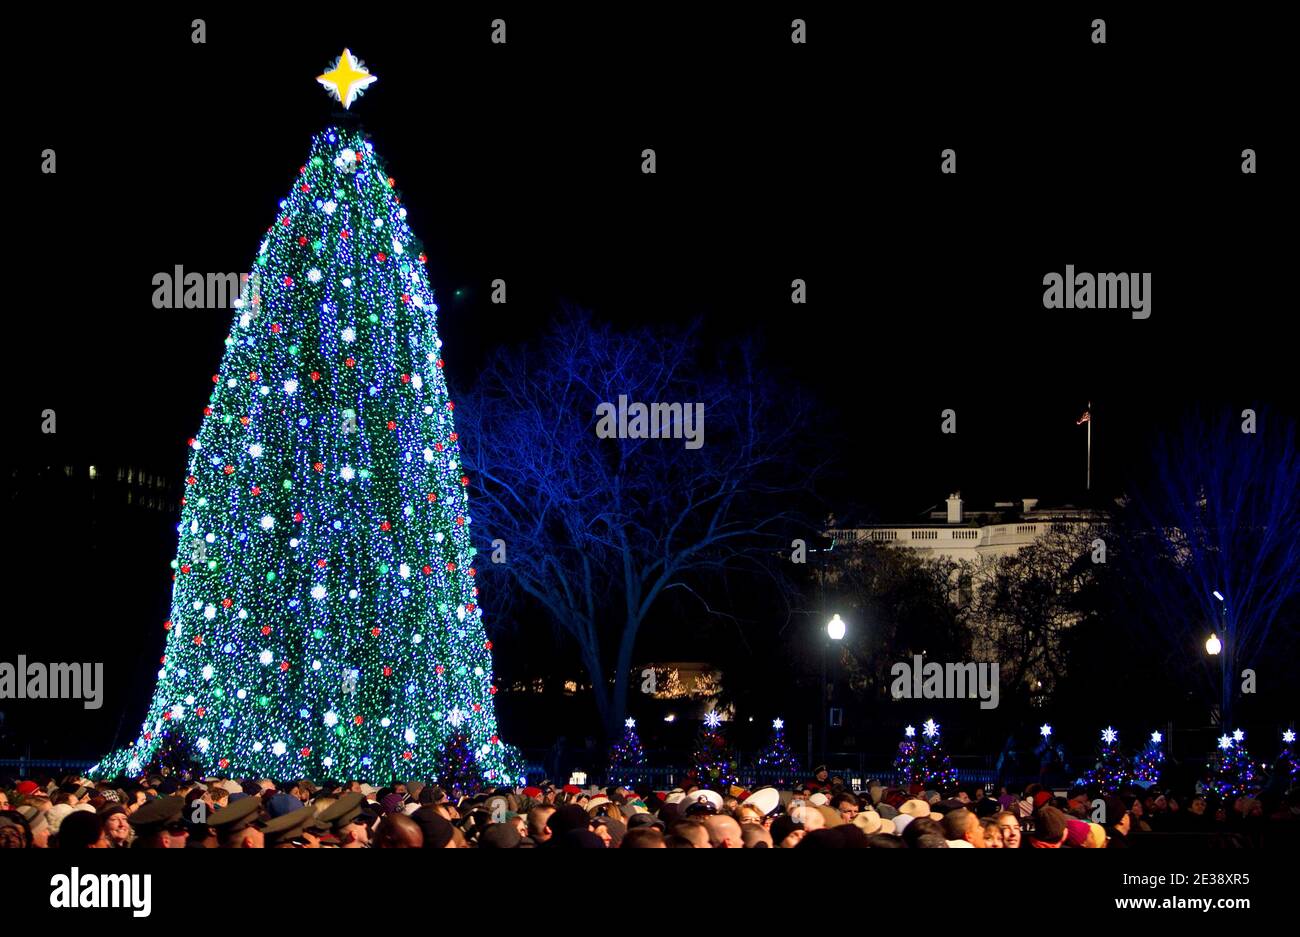 The National Christmas Tree stands on the Ellipse near the White House in Washington, DC, USA on December 09, 2010. The first Christmas tree lighting ceremony took place back in 1923, with President Calvin Coolidge presiding. Photo by Andrew Harrer/Bloomberg/ABACAPRESS.COM Stock Photo